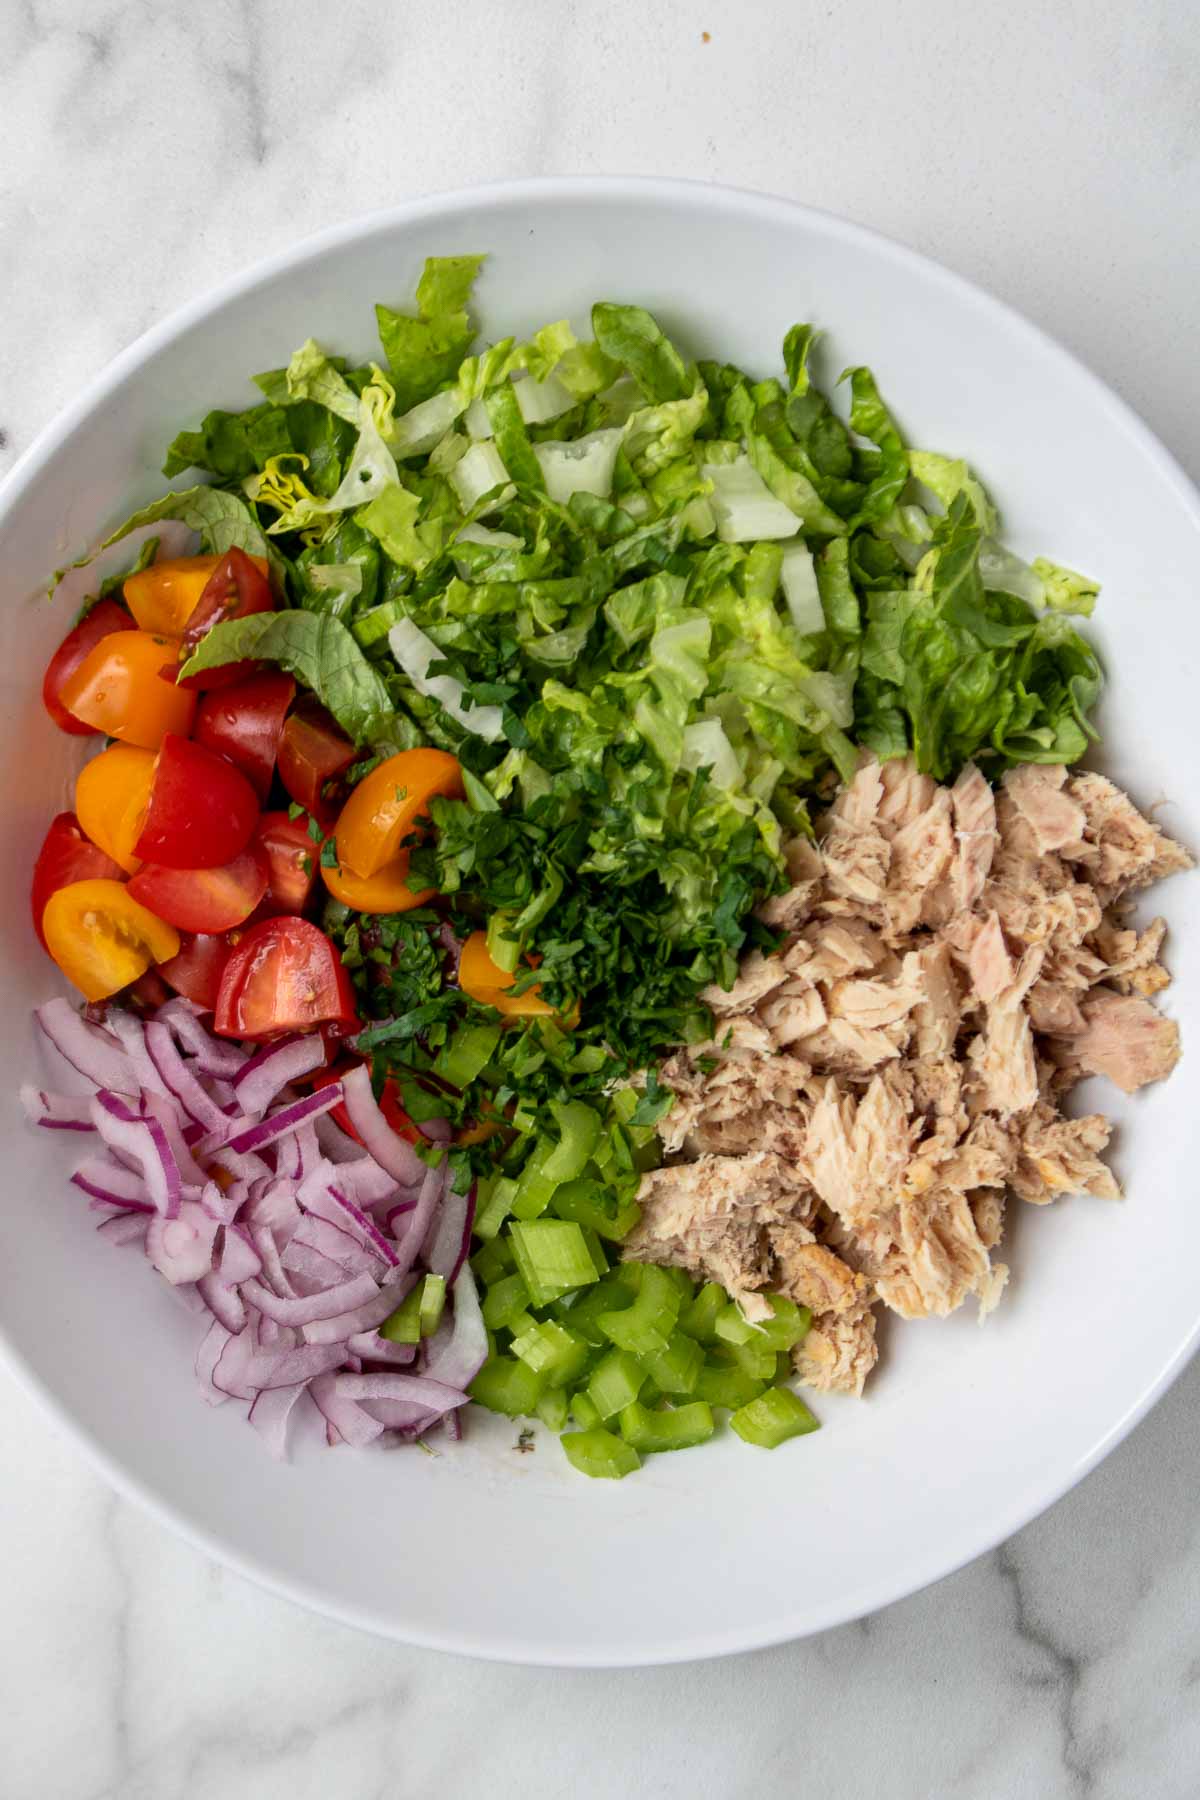 Ingredients for tuna salad in a white bowl: canned tuna, lettuce, cherry tomatoes, red onion, celery, parsley, mayonnaise, red wine vinegar, Dijon mustard, salt and pepper.